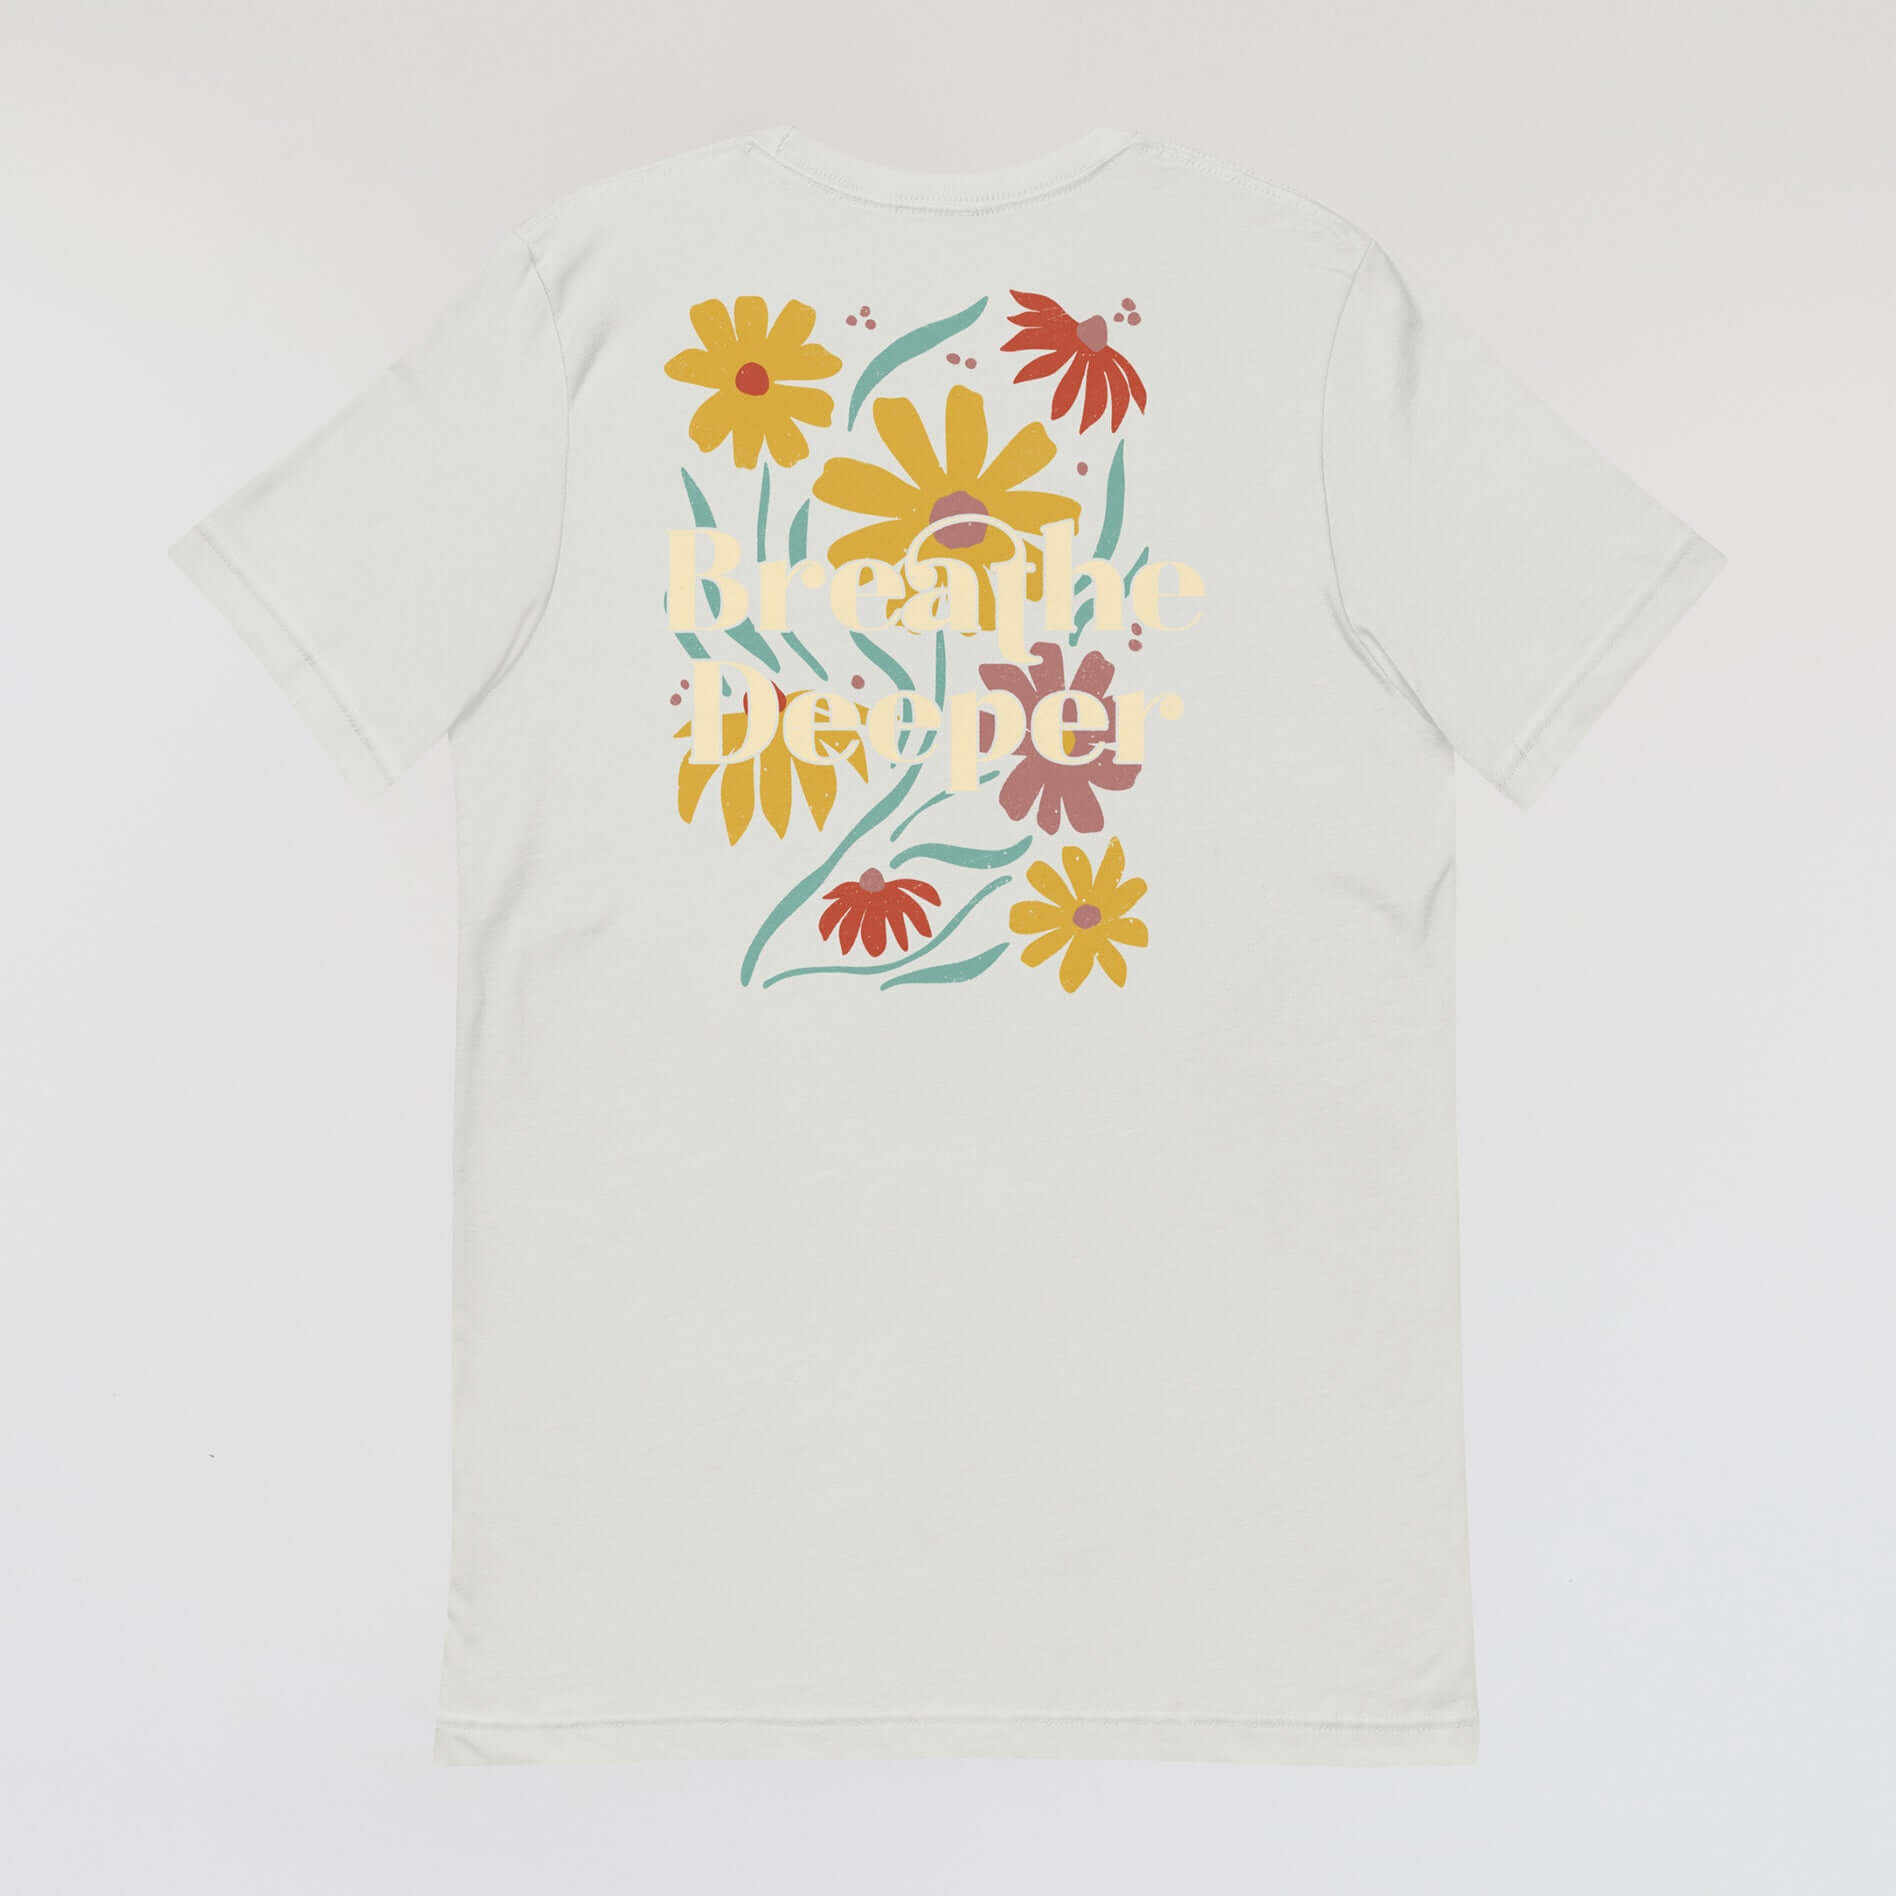 Not Roses - Women's Tees Collection